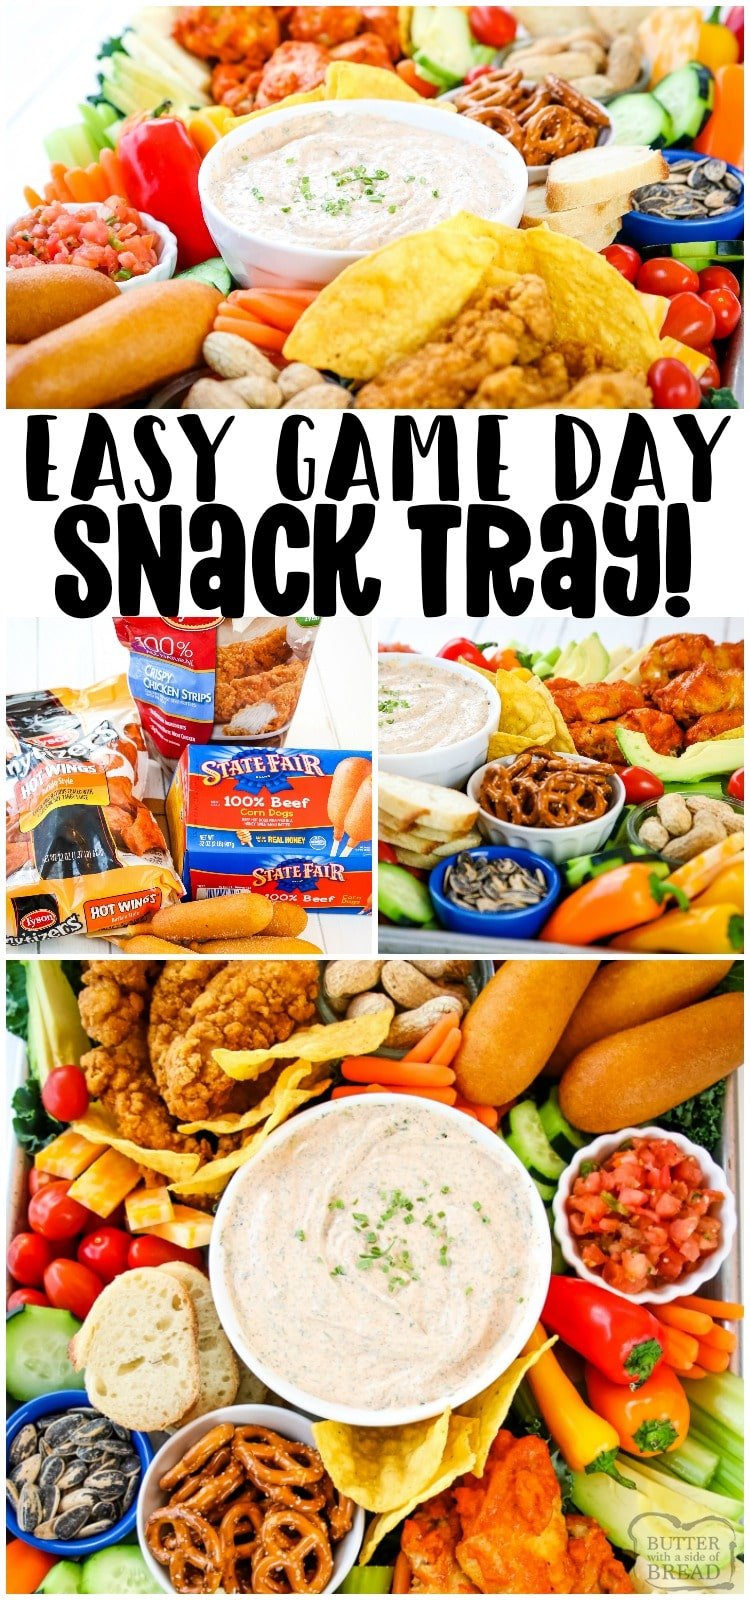 Smoky Homemade Ranch Dip served with all your game day favorites: hot wings, chicken strips & more! Wow the crowd with this savory game day snack tray that’s delicious & easy to put together. #gameday #footballfood #appetizers #ranchdip #gamedaysnacks #gamedayfood